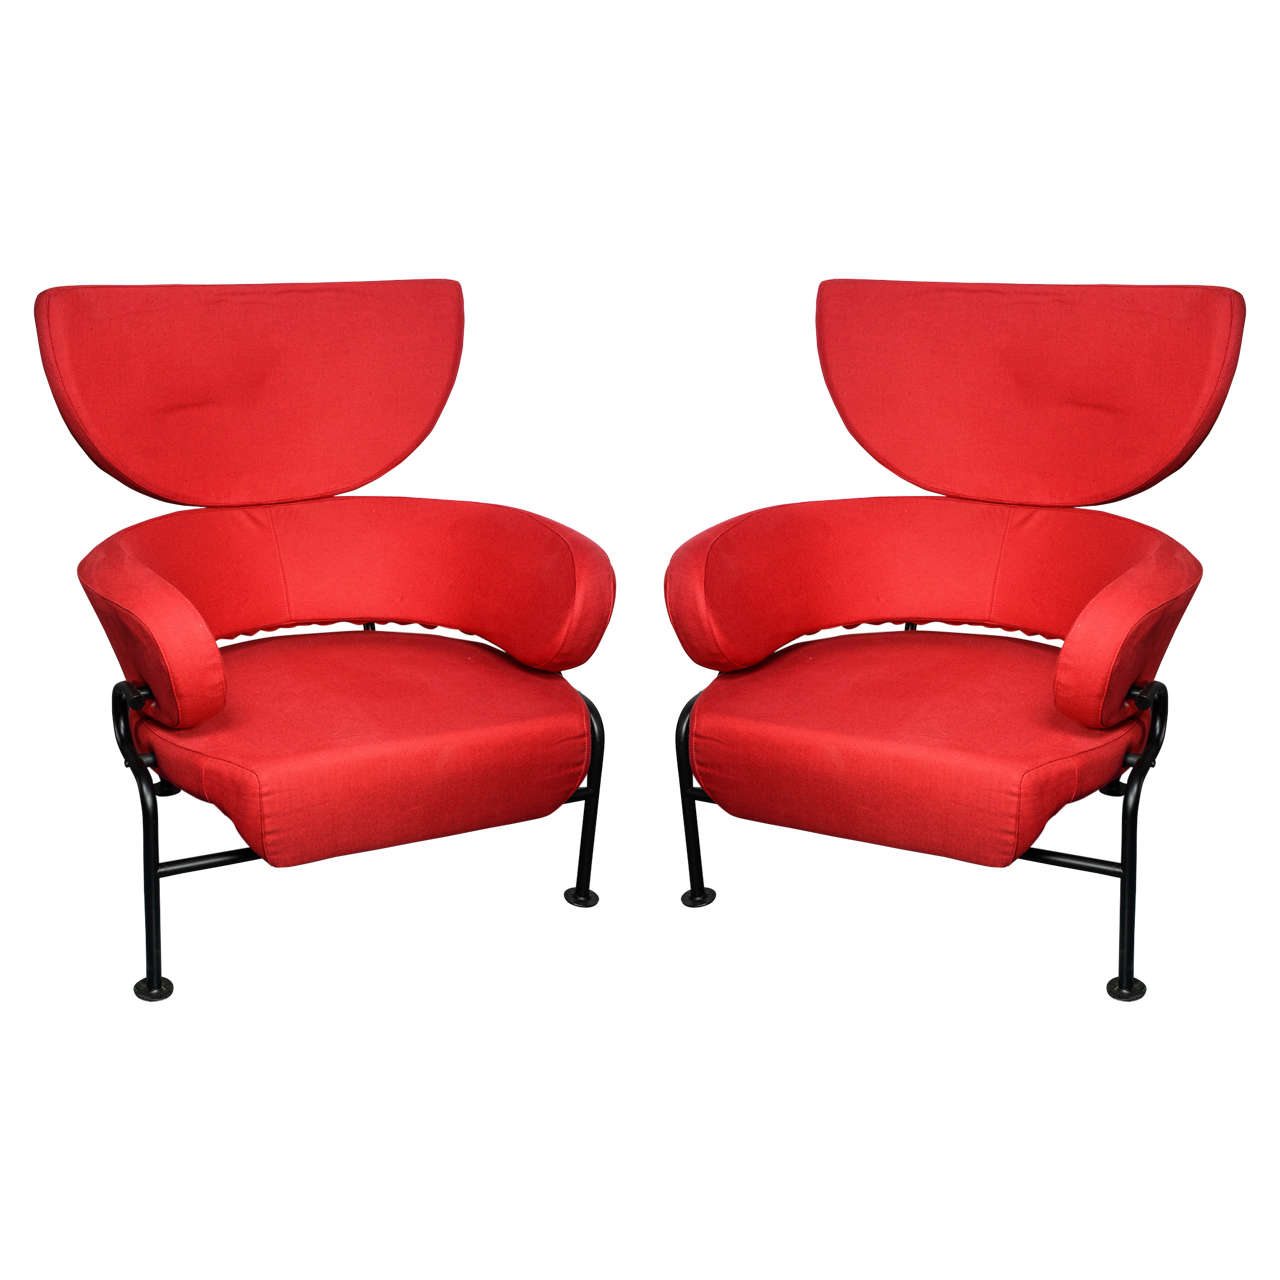 Pair of 1957 Armchairs by Franco Albini